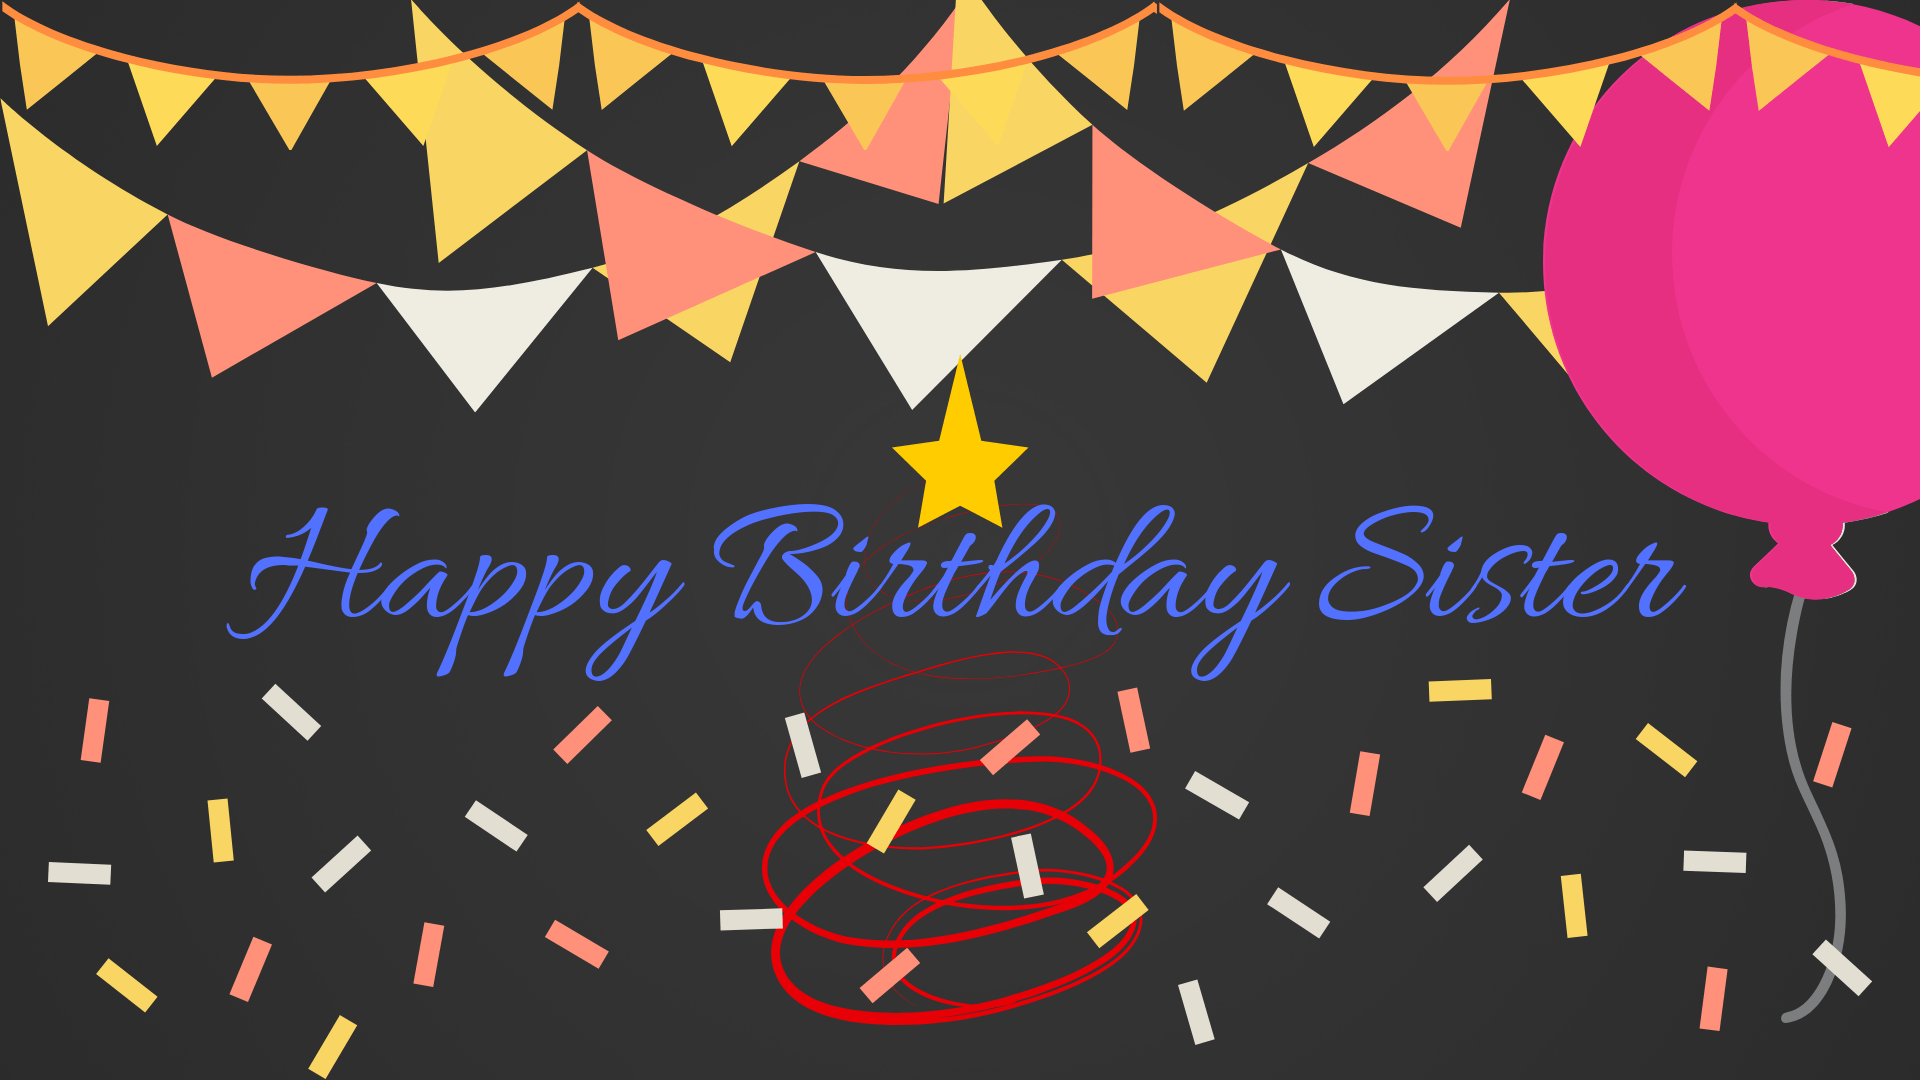 Happy Birthday Sister Wallpapers Hd Background Images - Graphic Design - HD Wallpaper 